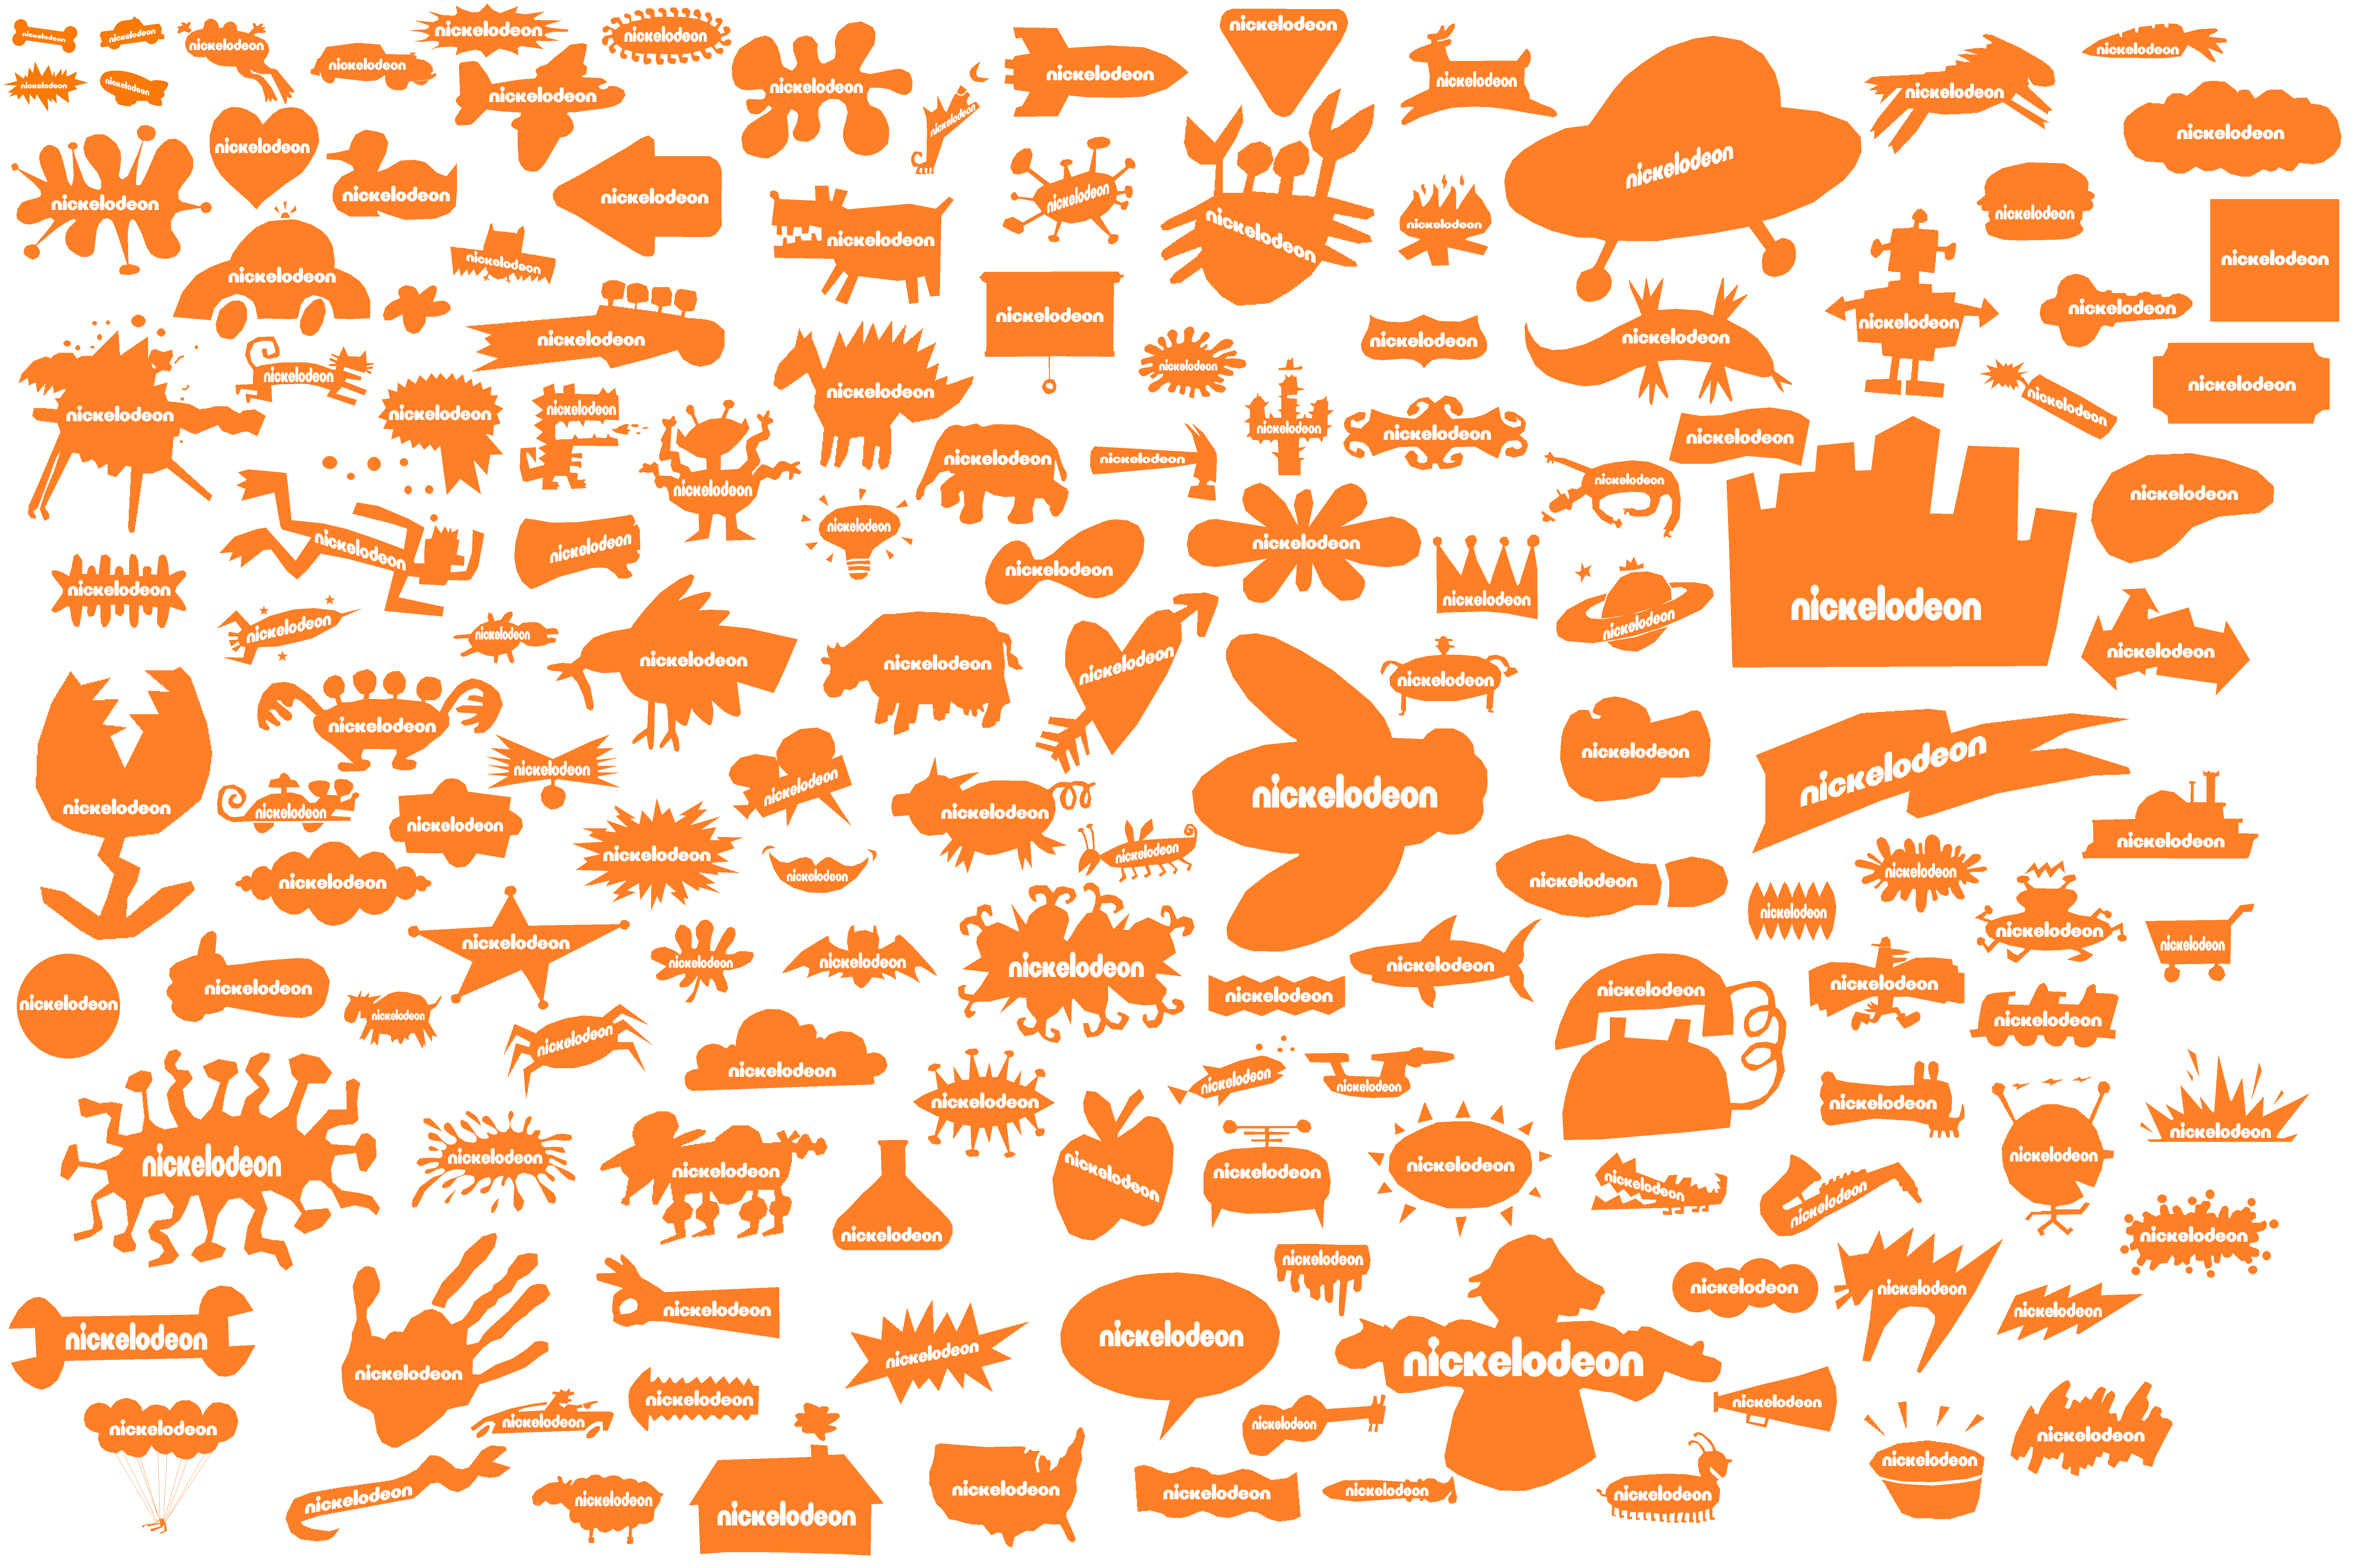 Nickelodeon Logo - What If The Current Nickelodeon Logo ran into the Old Nick Logos